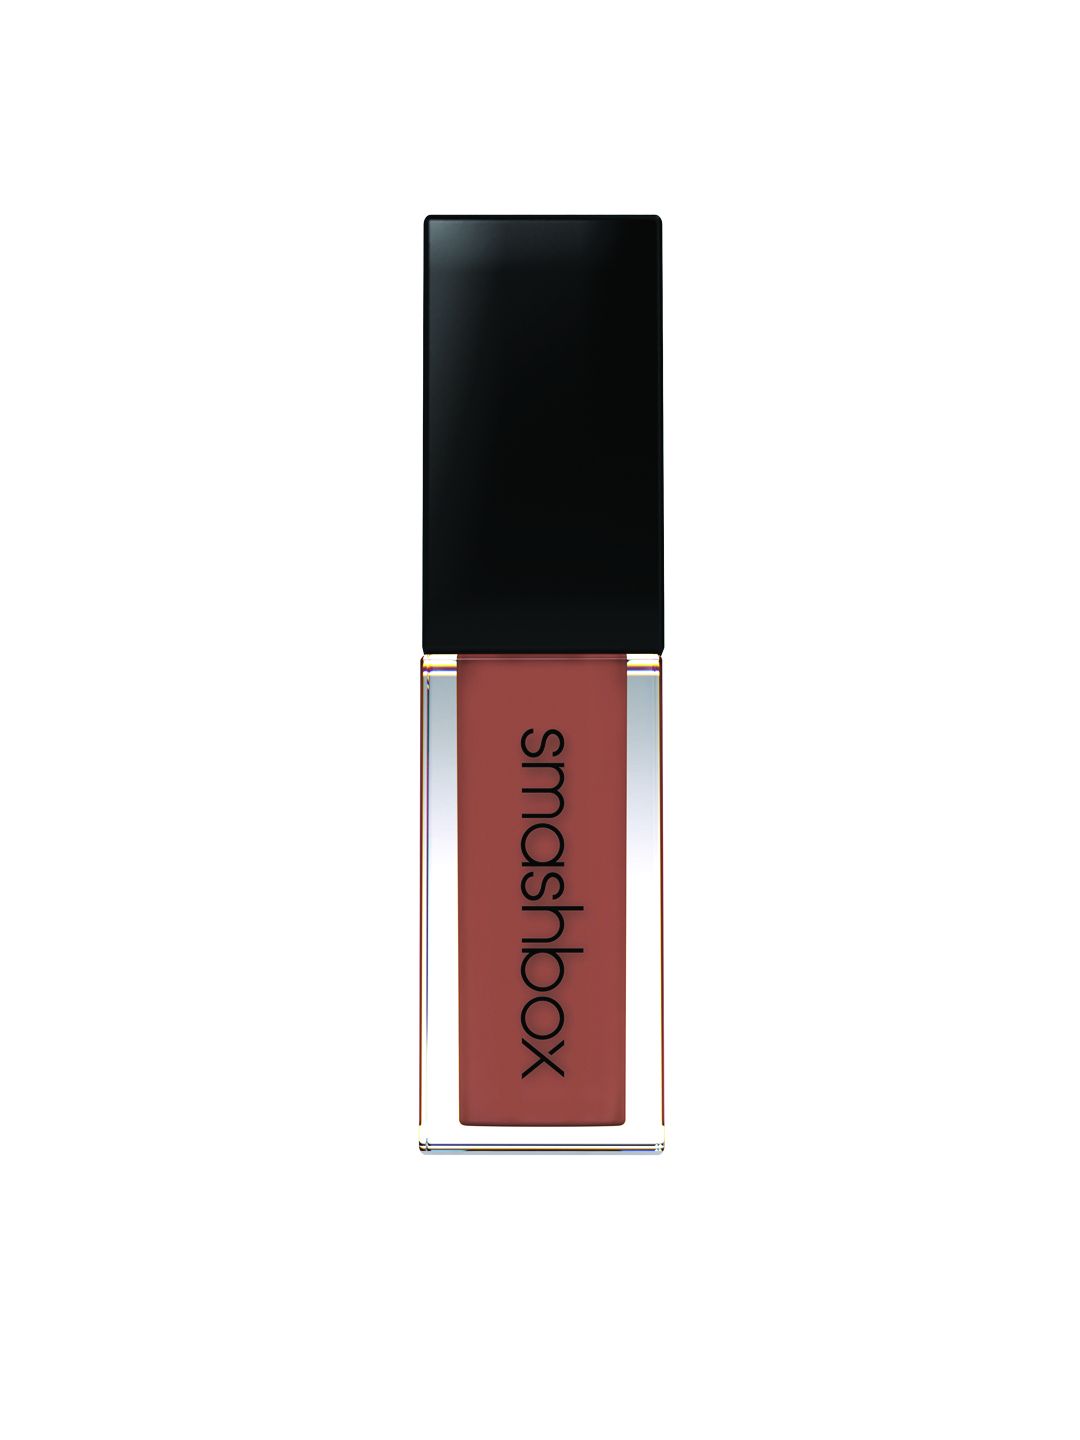 Smashbox Women Always On Liquid Matte Lipstick- Stepping Out (4ml) Price in India